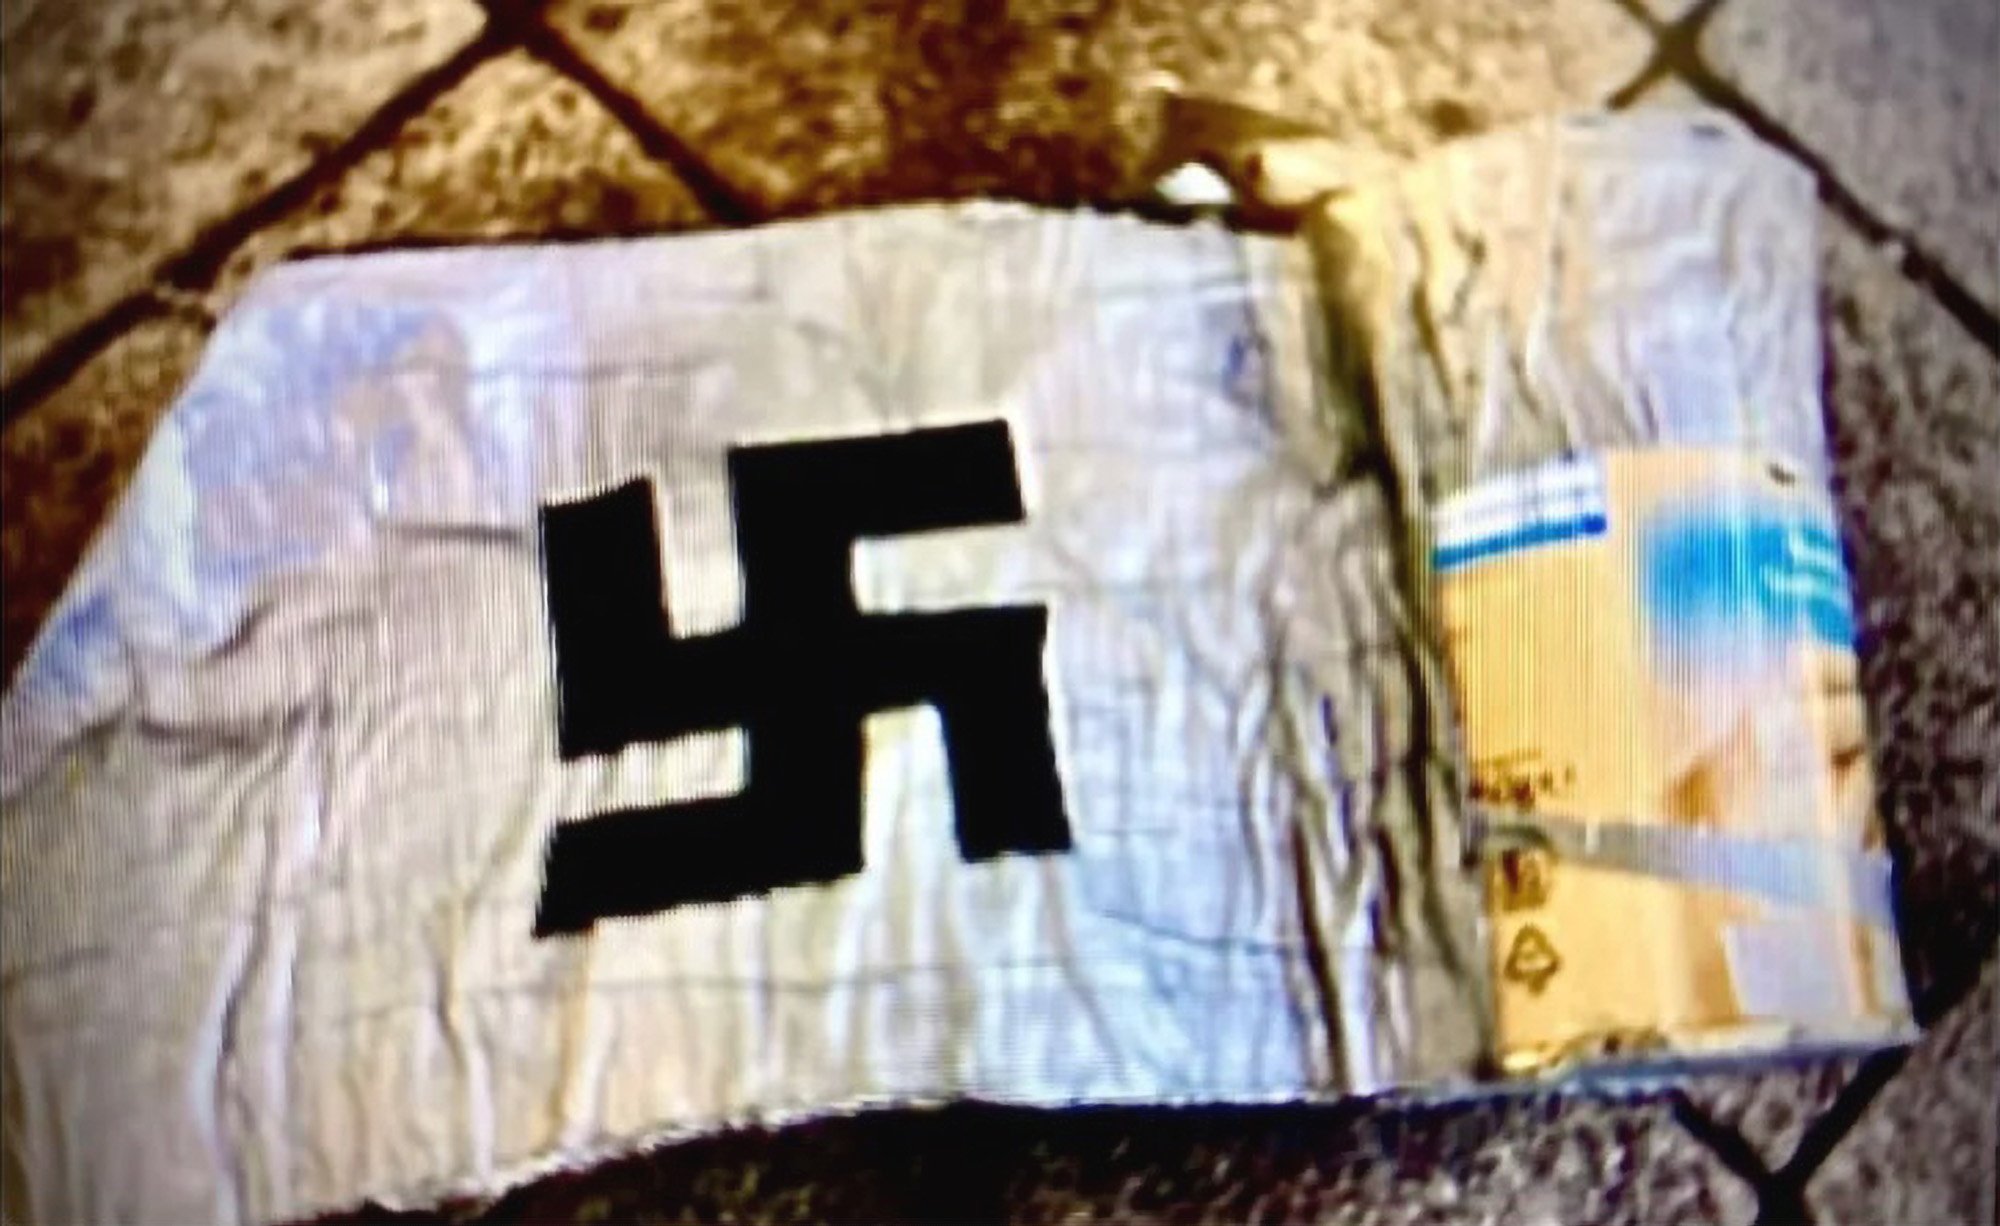 Read more about the article NAZI PIECE OF WORK: Cops Find Pipe Bombs With Swastika Painted On Them At Train Station